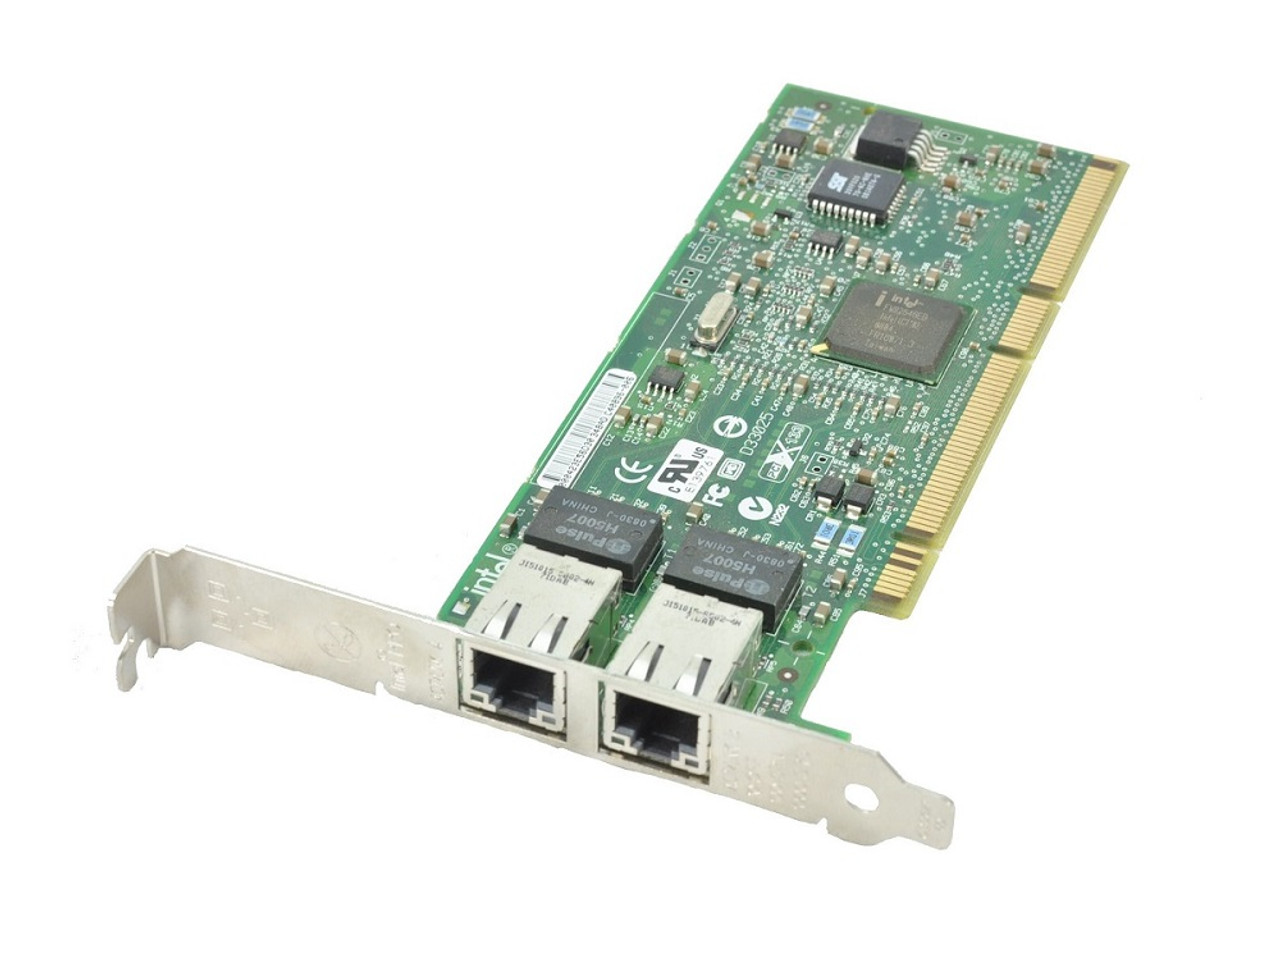 232386-001 - HP Remote Insight Lights Out Ii Pcb Pci Management Adapter